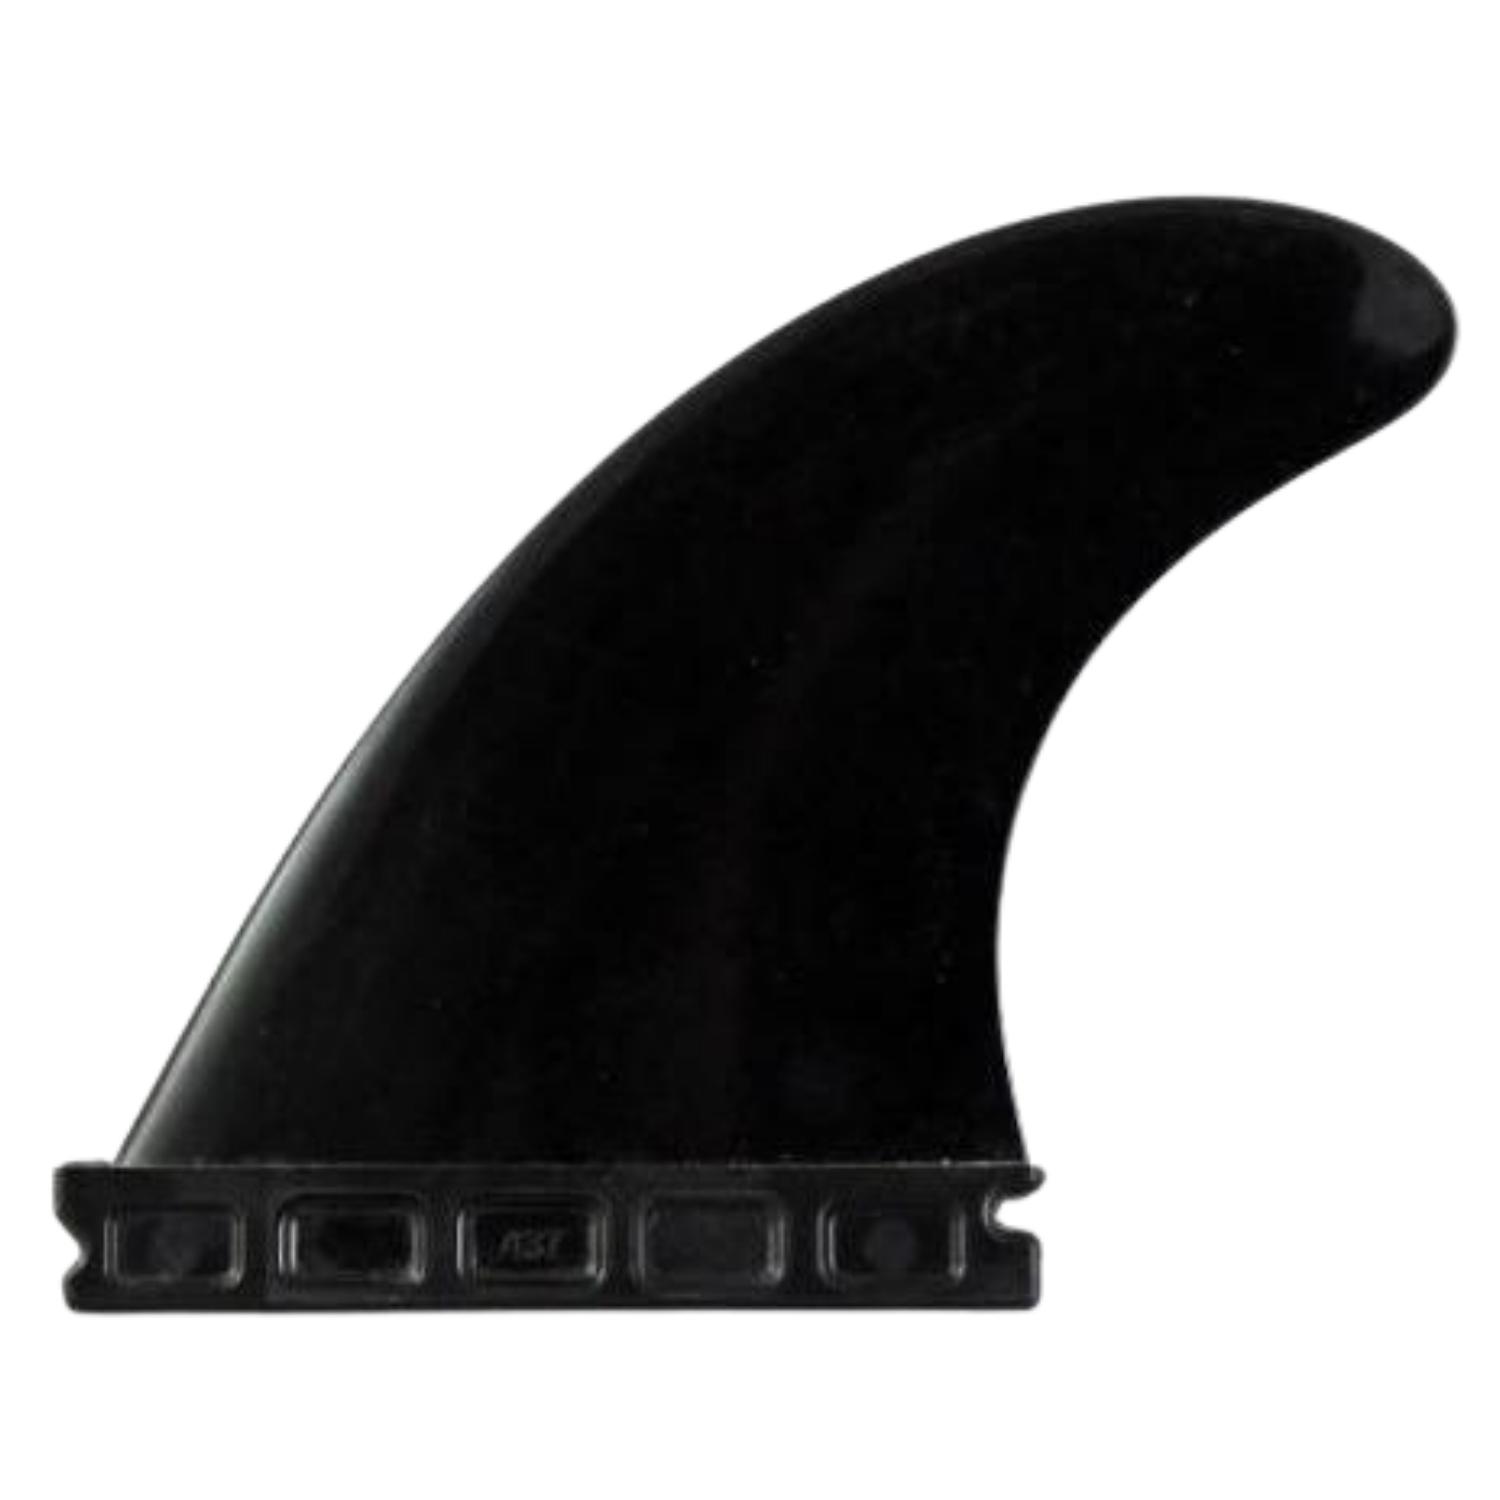 Northcore Futures Compatible F4 Surfboard Fins - Black - Futures Fins by Northcore Small Fins